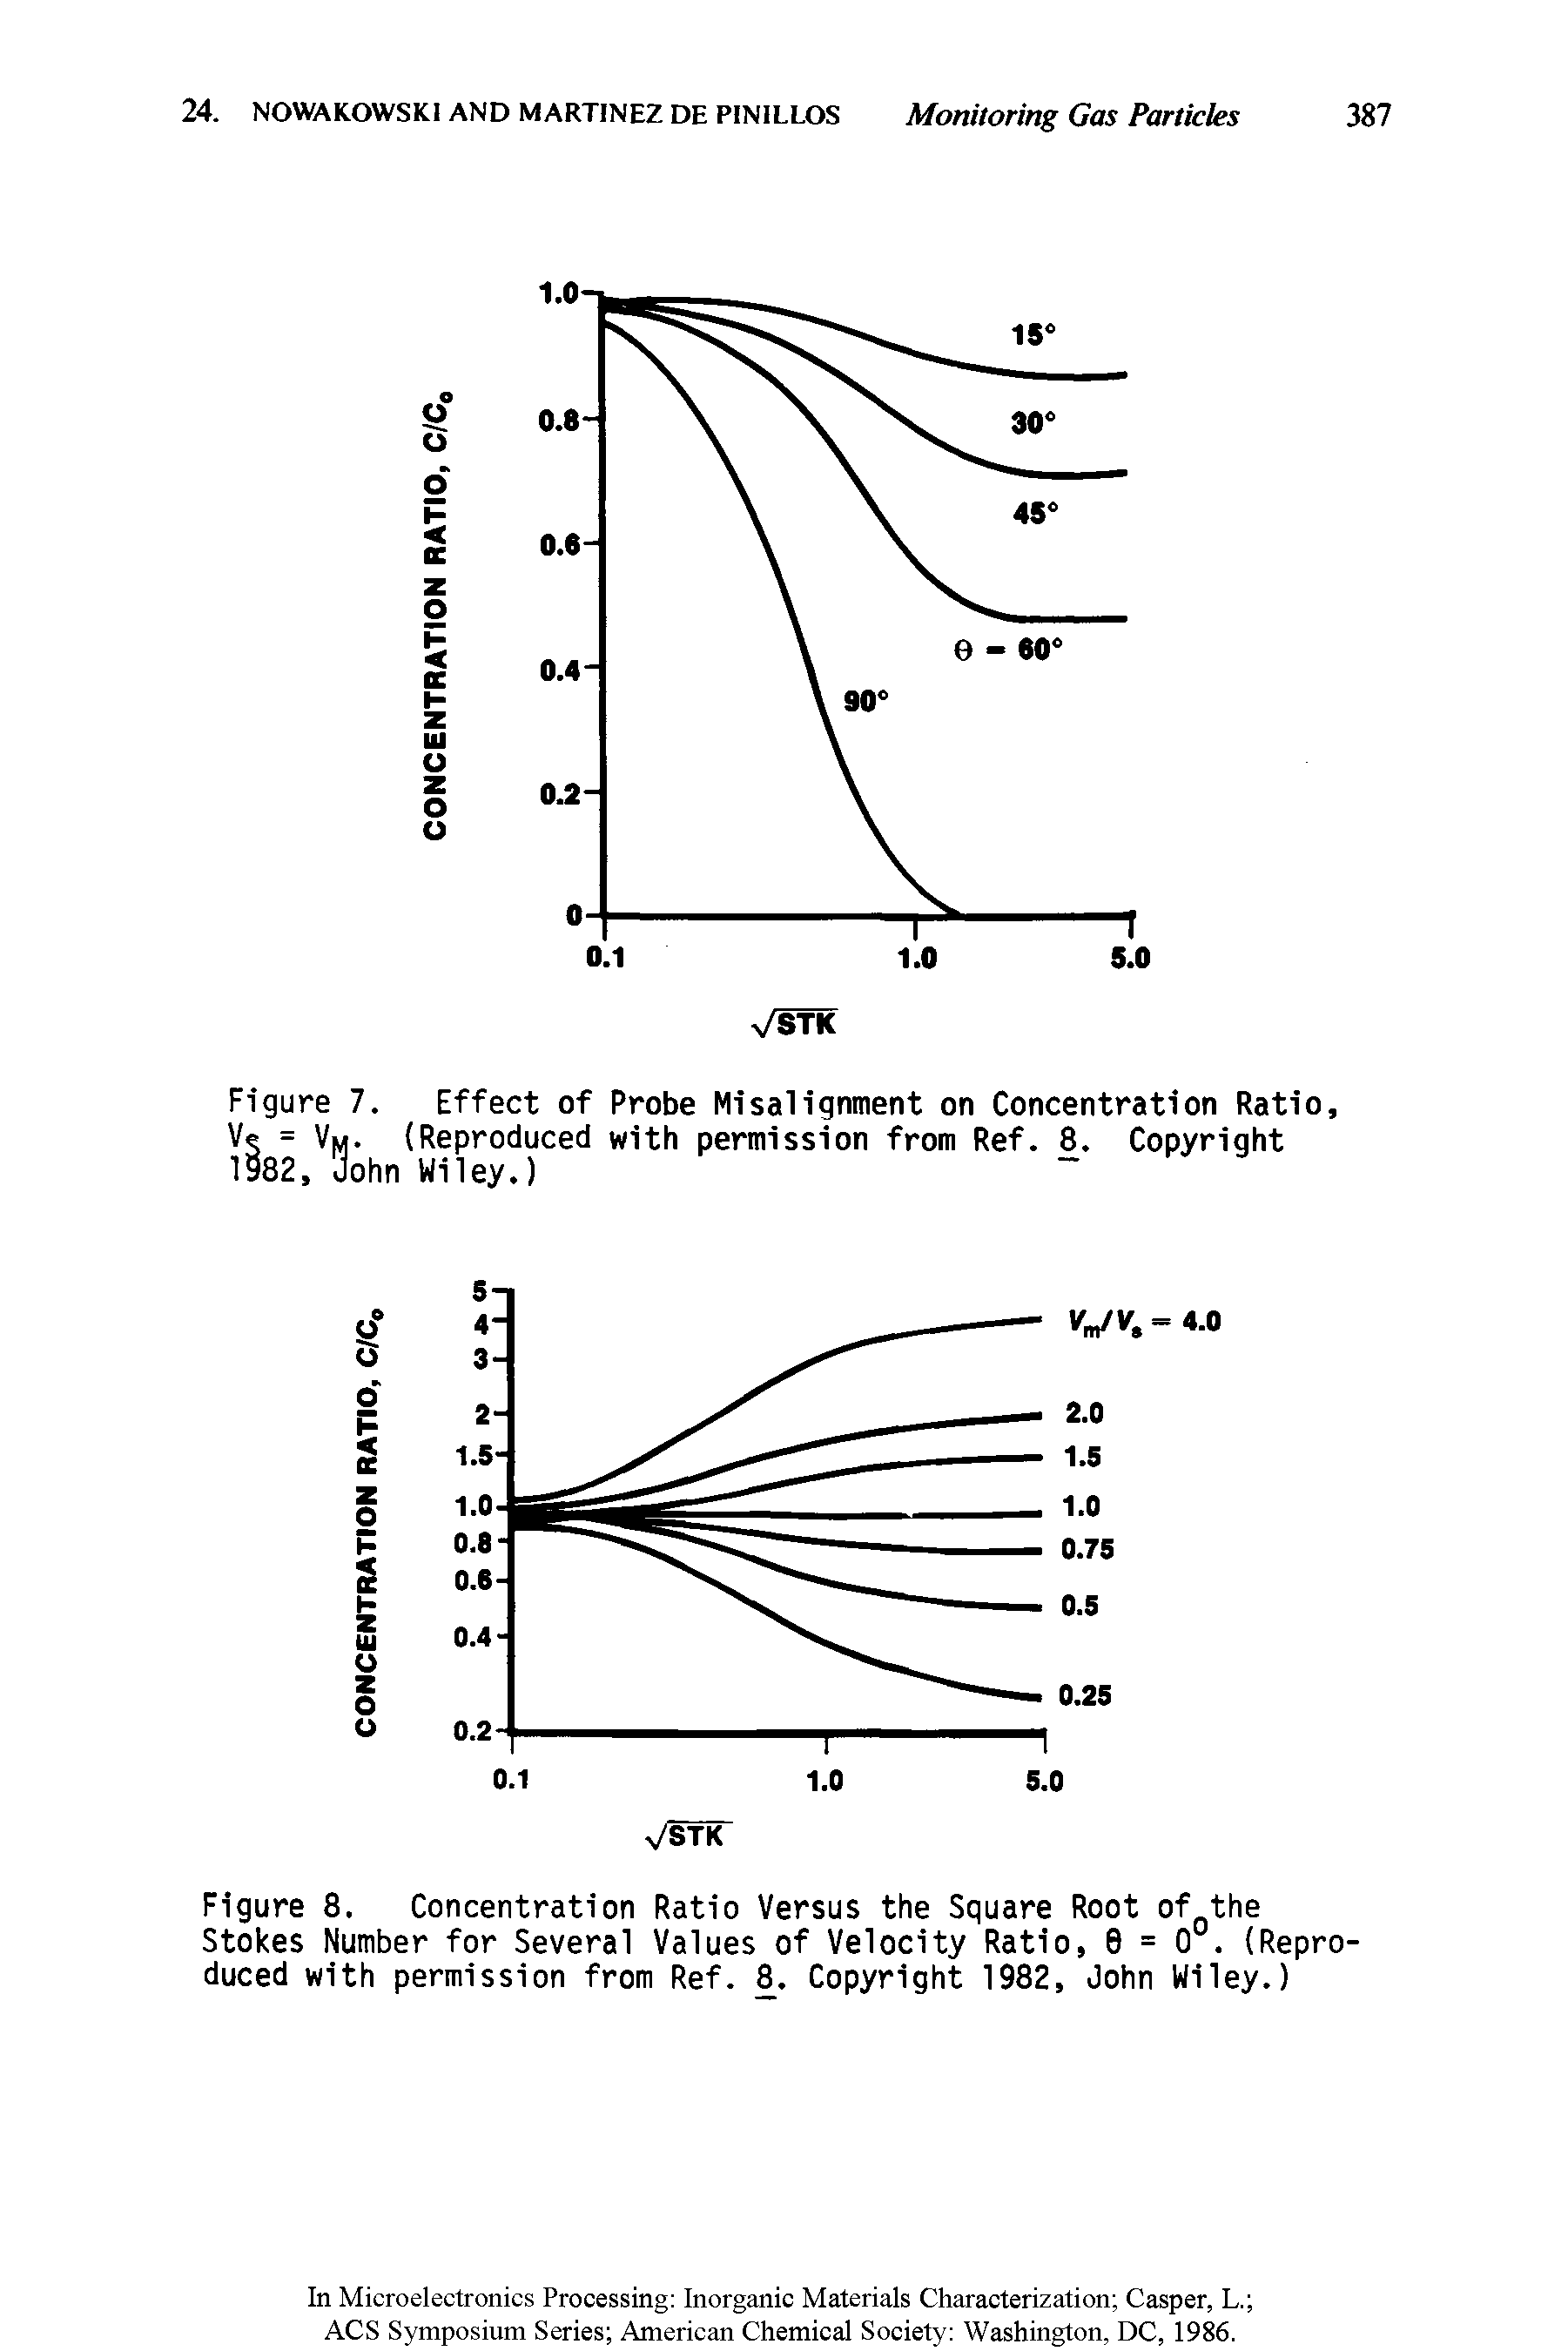 Figure 7. Effect of Probe Misalignment on Concentration Ratio, Vs = Vu. (Reproduced with permission from Ref. 8. Copyright 1982, John Wiley.)...